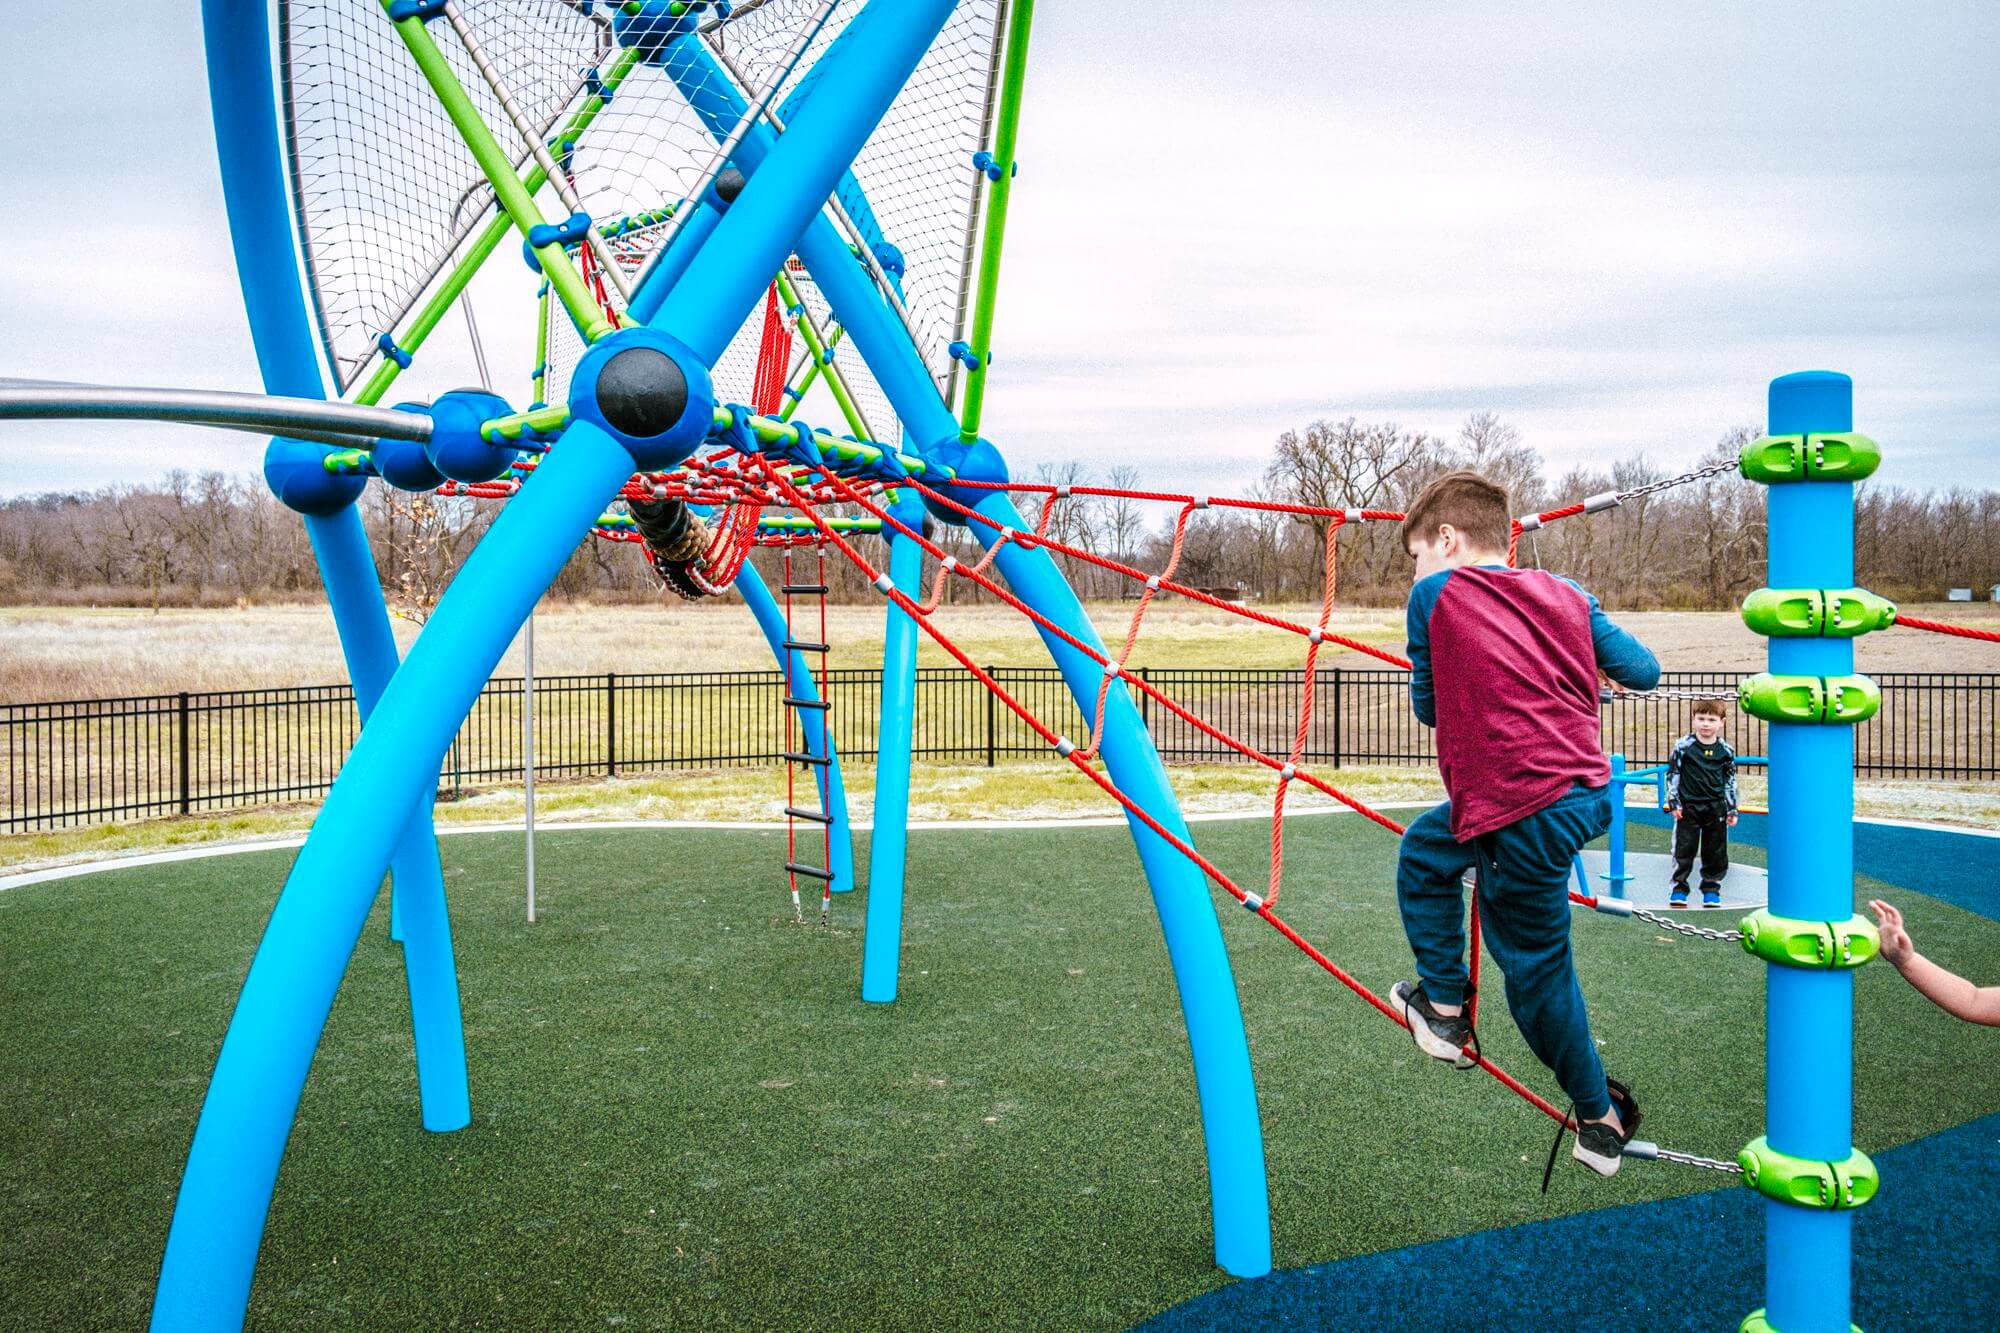 A child climbs a red rope on a blue climbing frame, with another child observing from below, in a playground with diverse play structures.